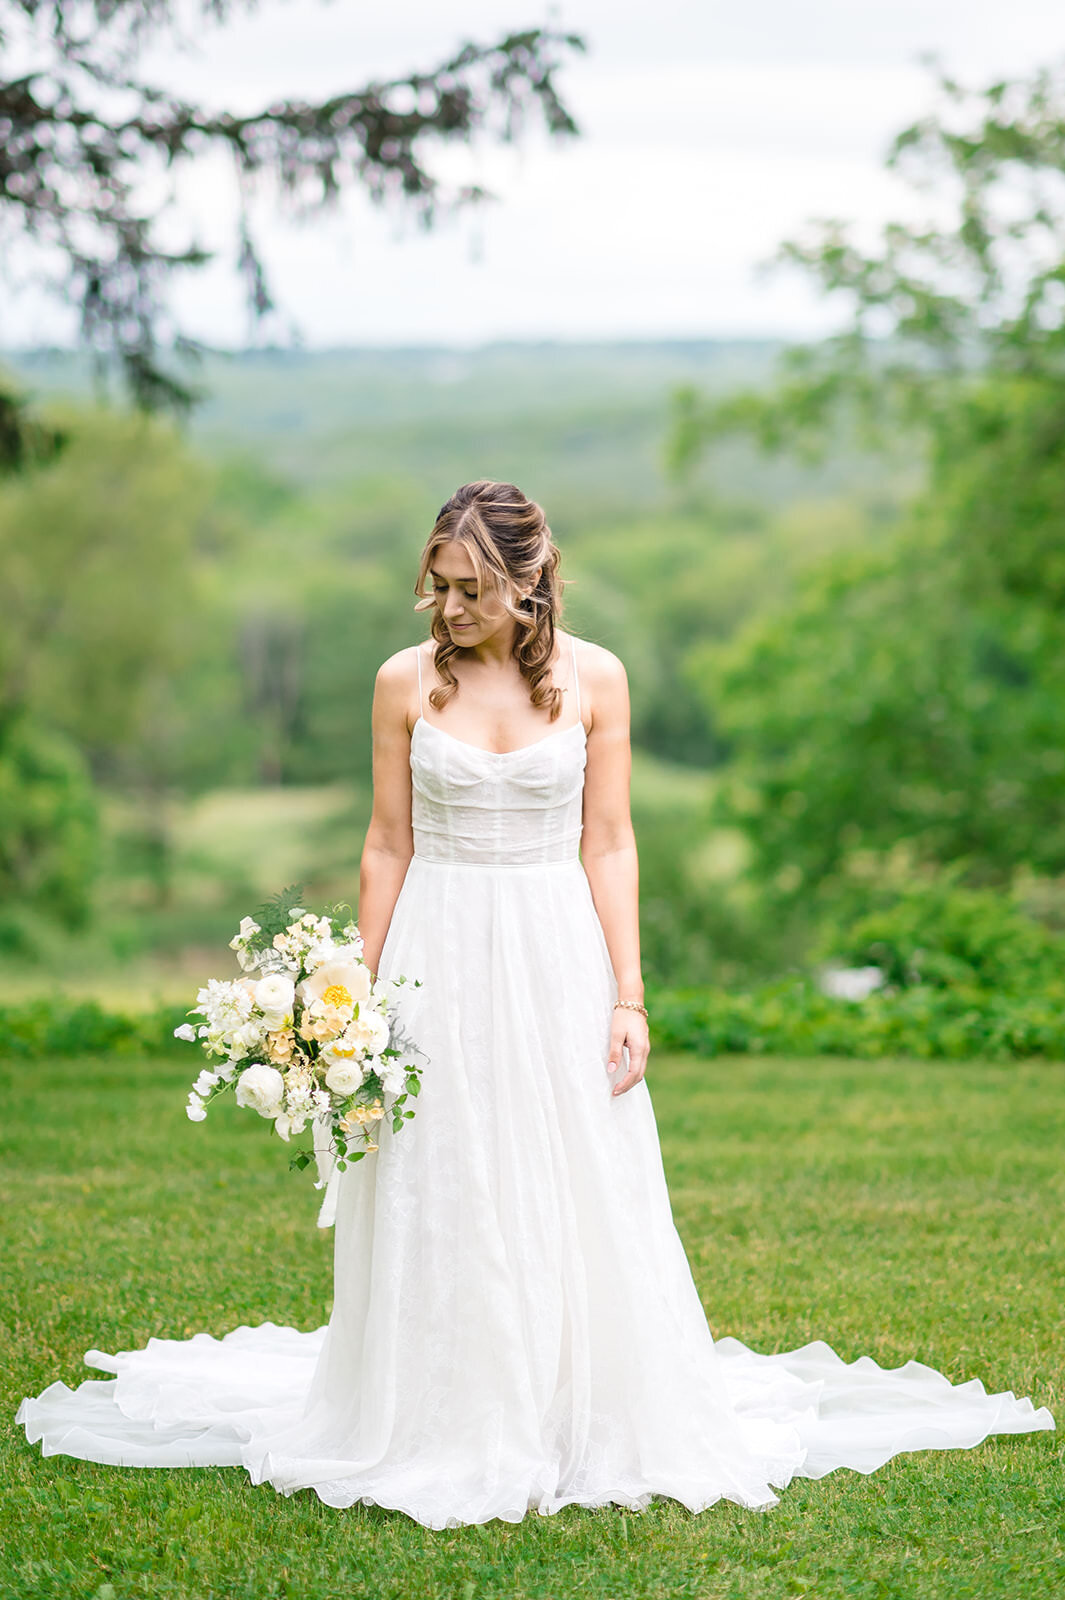 A bride holding a bouquet of flowers, standing outdoors with a scenic view of hills.